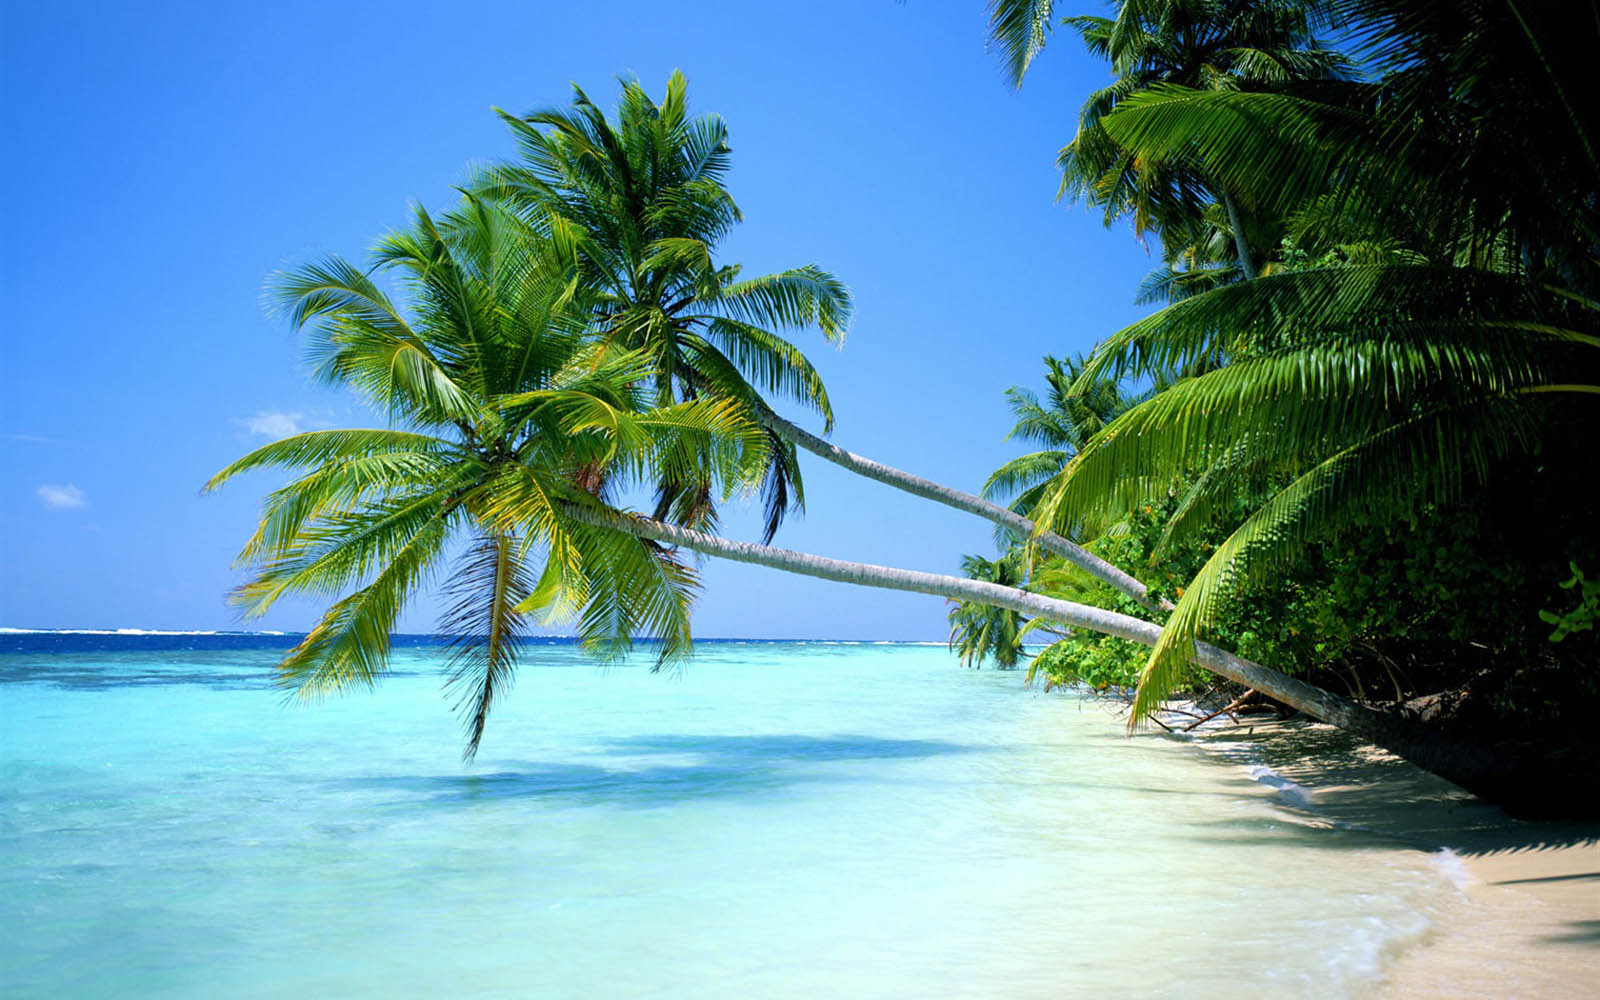 Tag Coconut Tree Wallpapers BackgroundsPhotos Images and Pictures